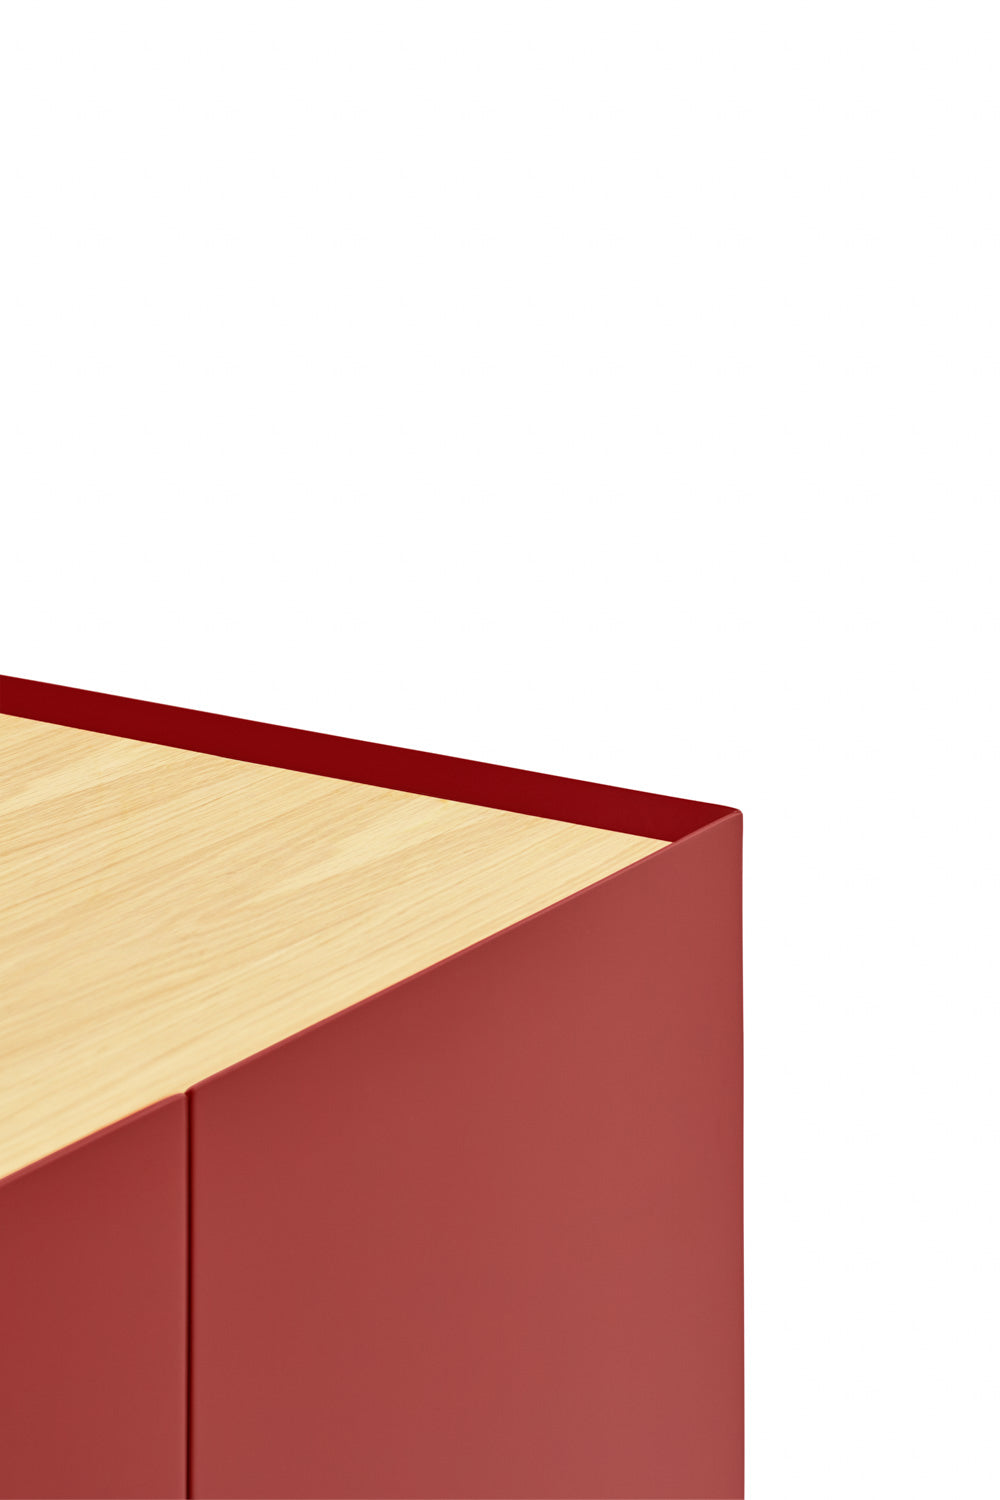 ARISTA high chest of drawers red